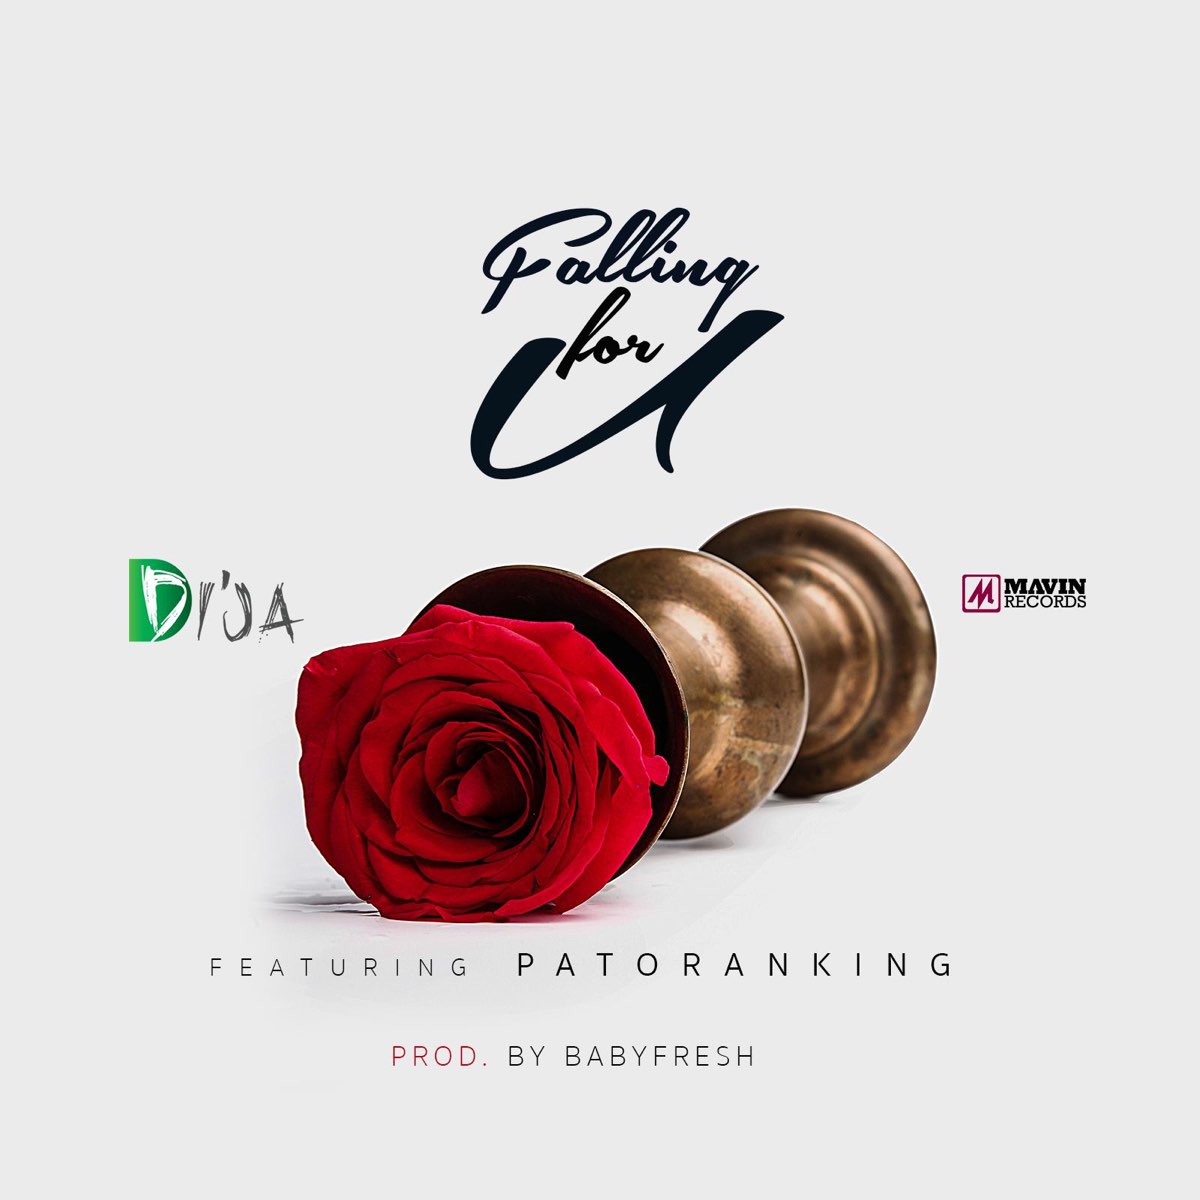 Falling for You (feat. Patoranking) - Single by Di'Ja on Apple Music